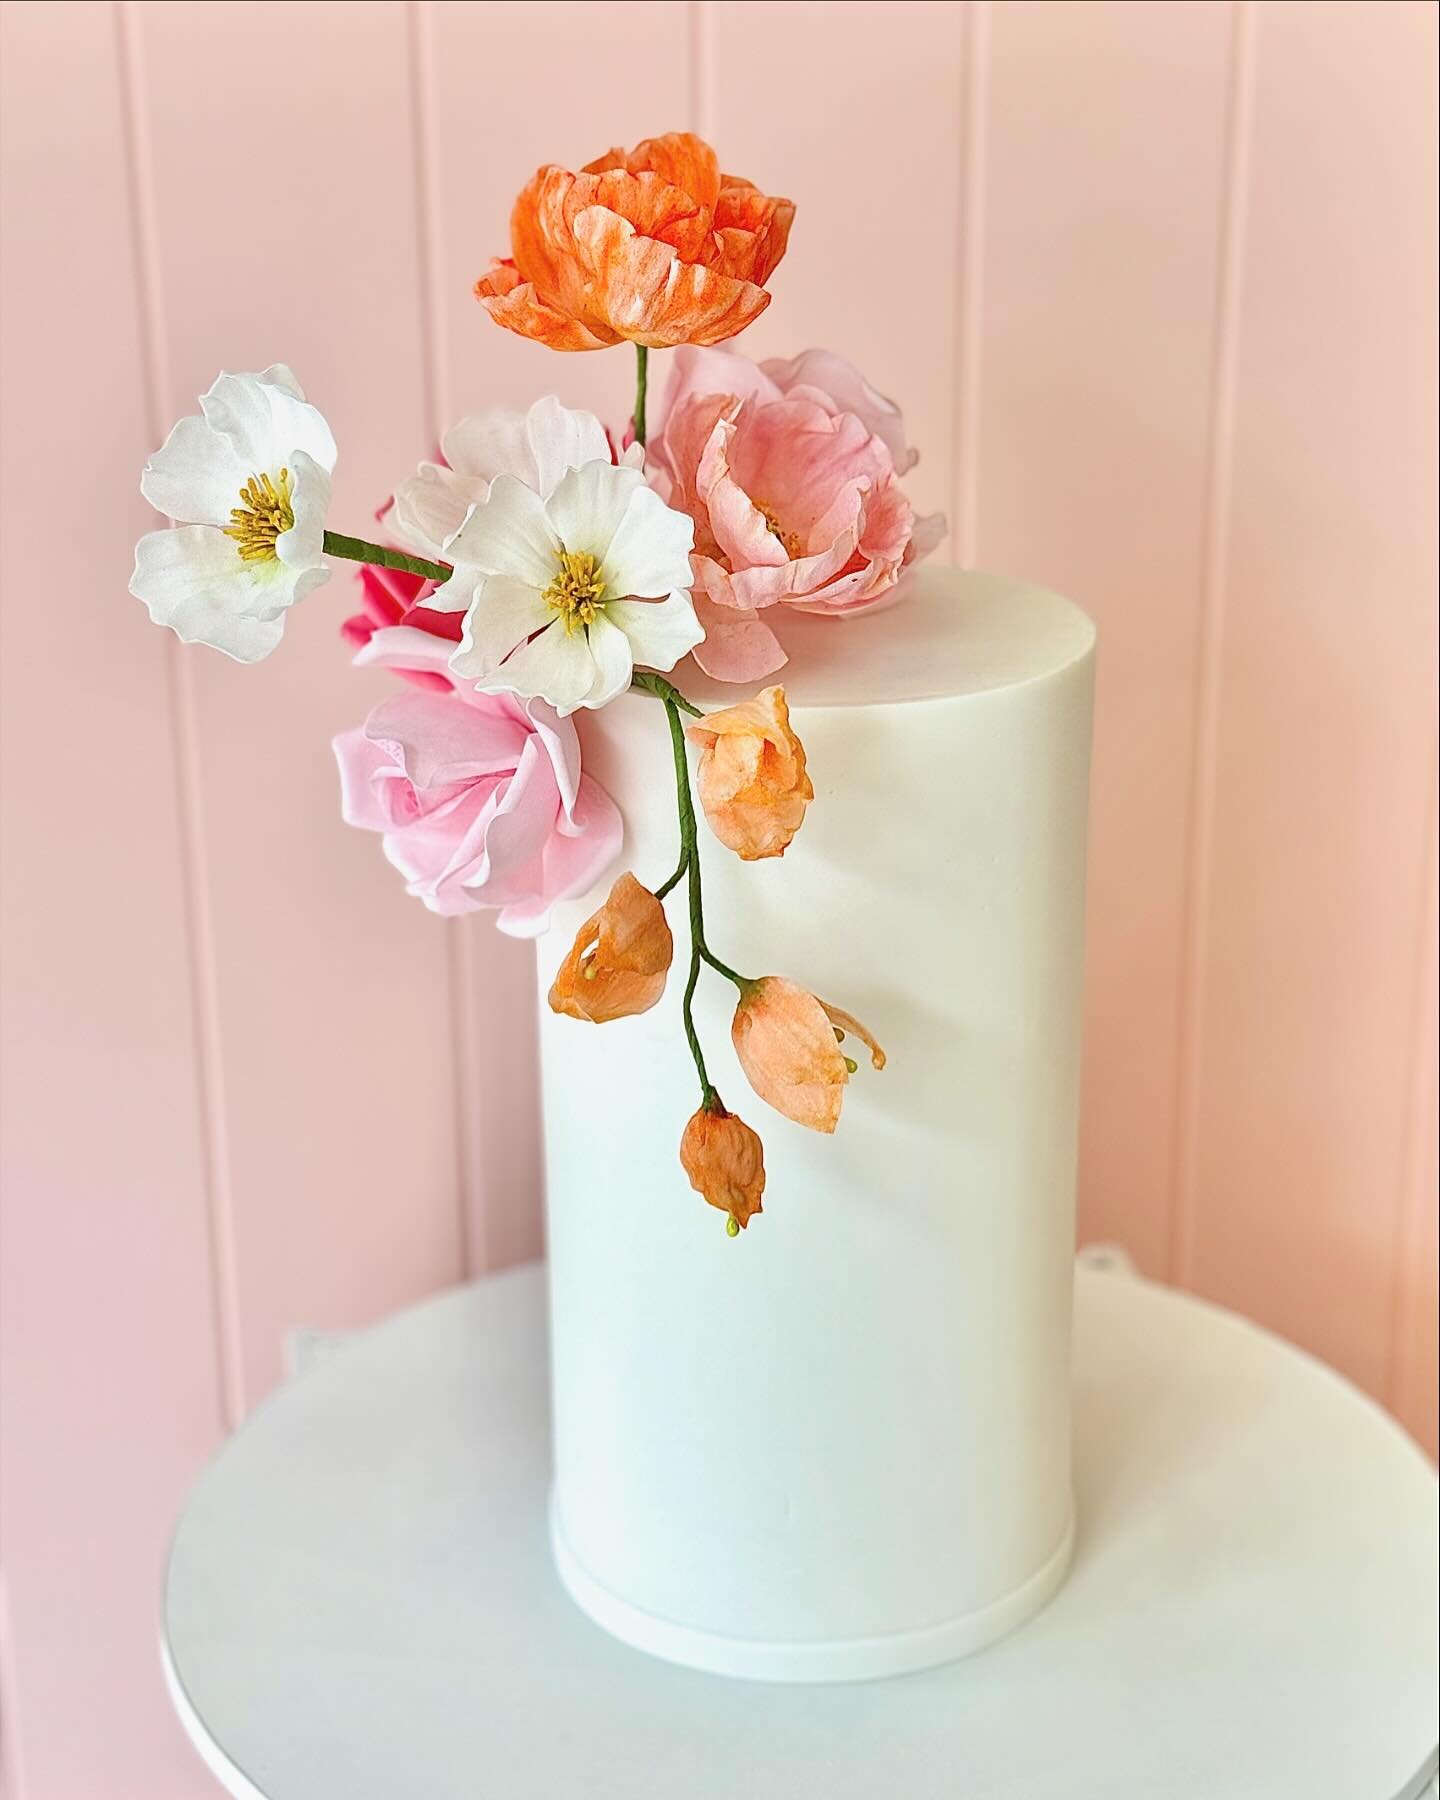 Extra tall and slim tier with handmade florals to match the wedding blooms 
.
.
#weddingcake #sydneywedding #sydneyweddingcake #sydneycakes #instacake #cakelover #fayecahillcakedesign